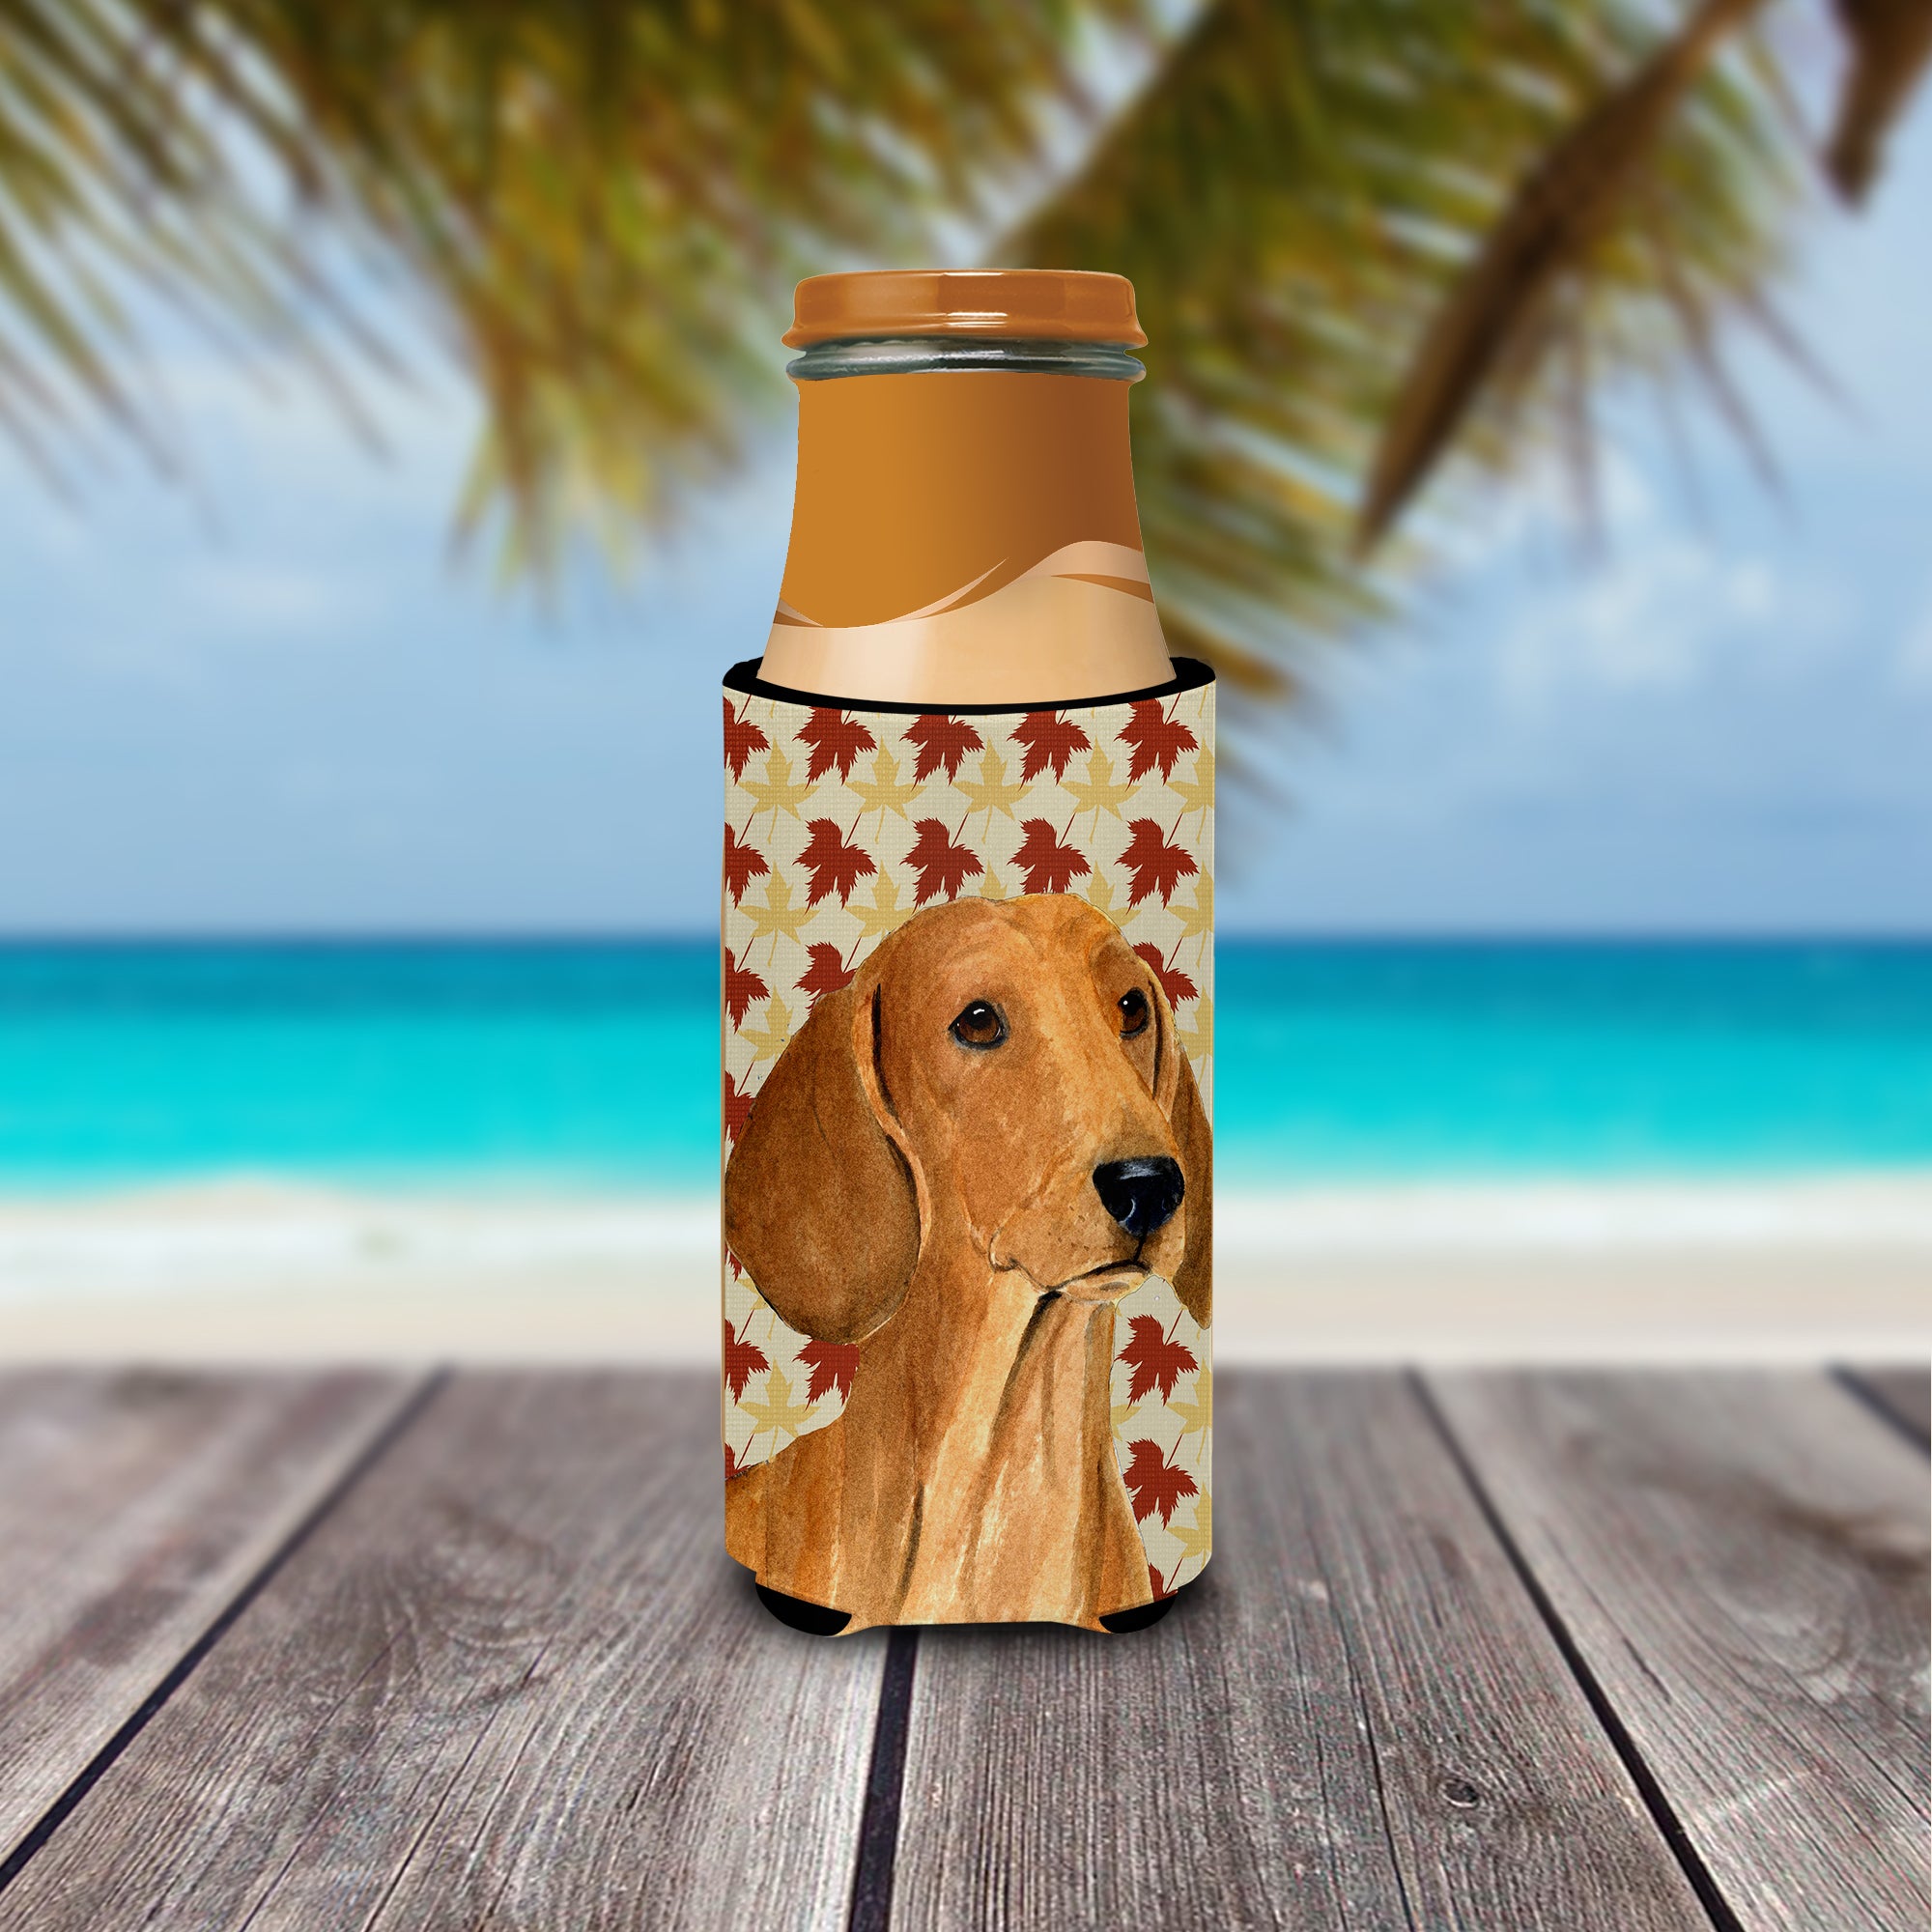 Dachshund Fall Leaves Portrait Ultra Beverage Insulators for slim cans SS4369MUK